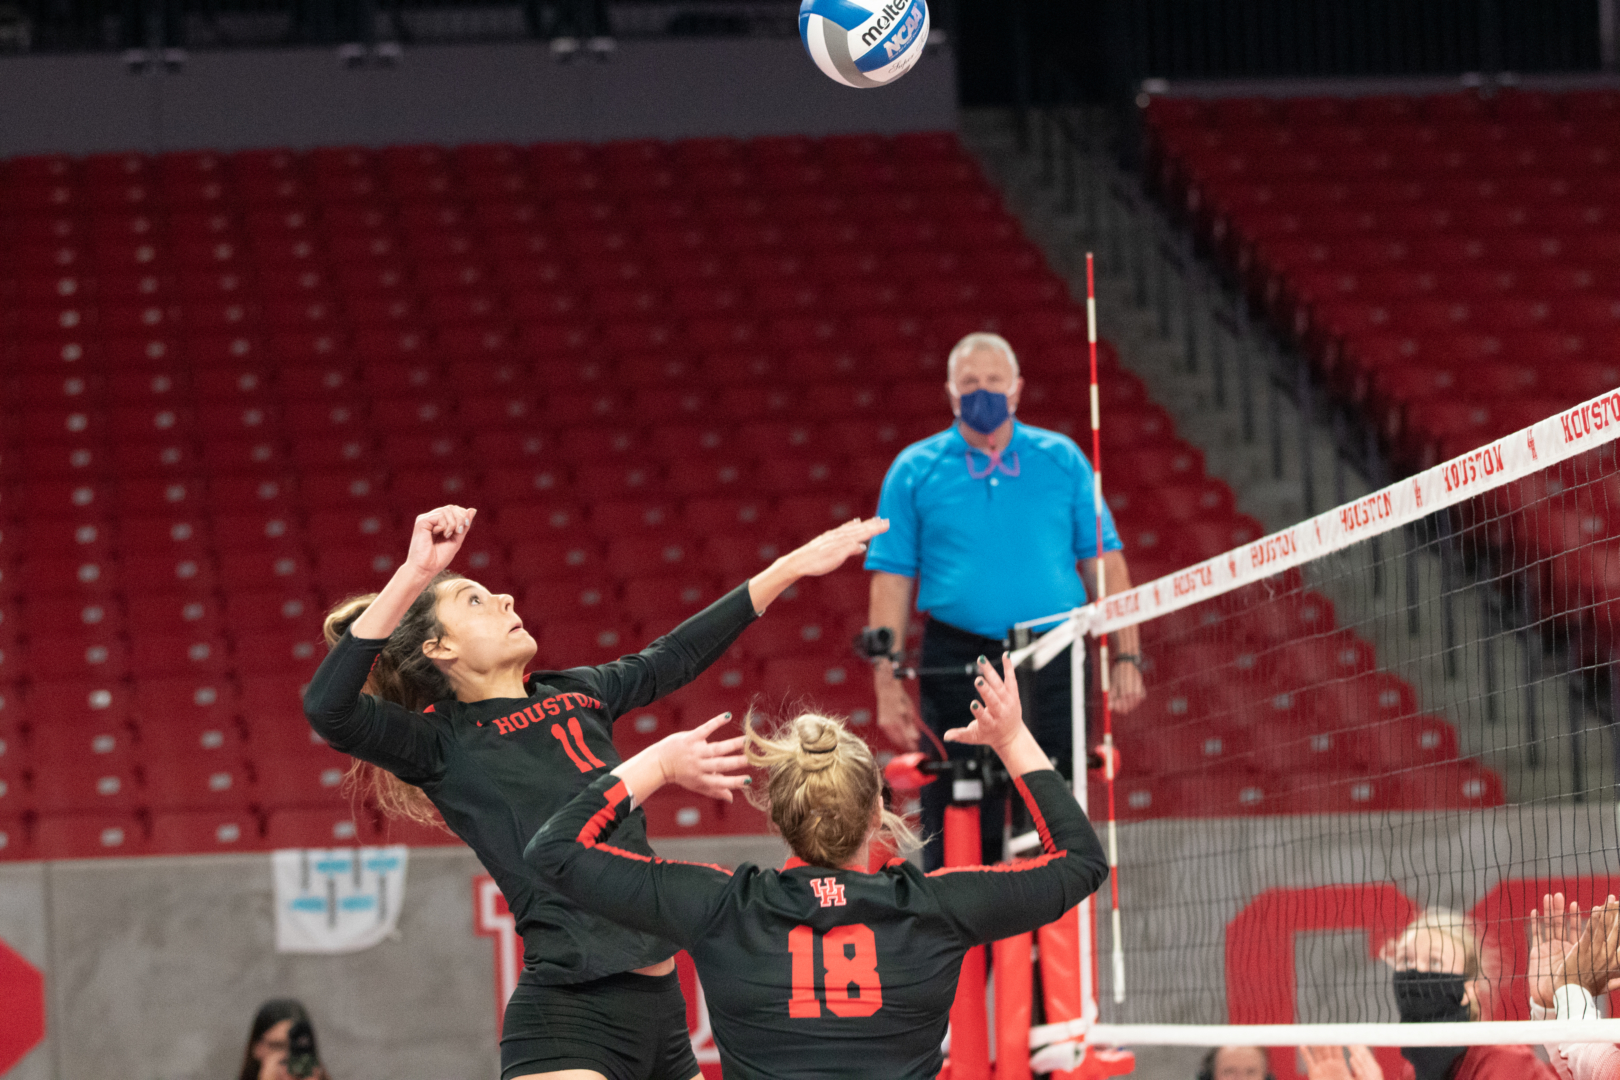 UH volleyball completed its eighth sweep of the 2021 season on Sunday afternoon against Tulsa. | Esther Umoh/The Cougar